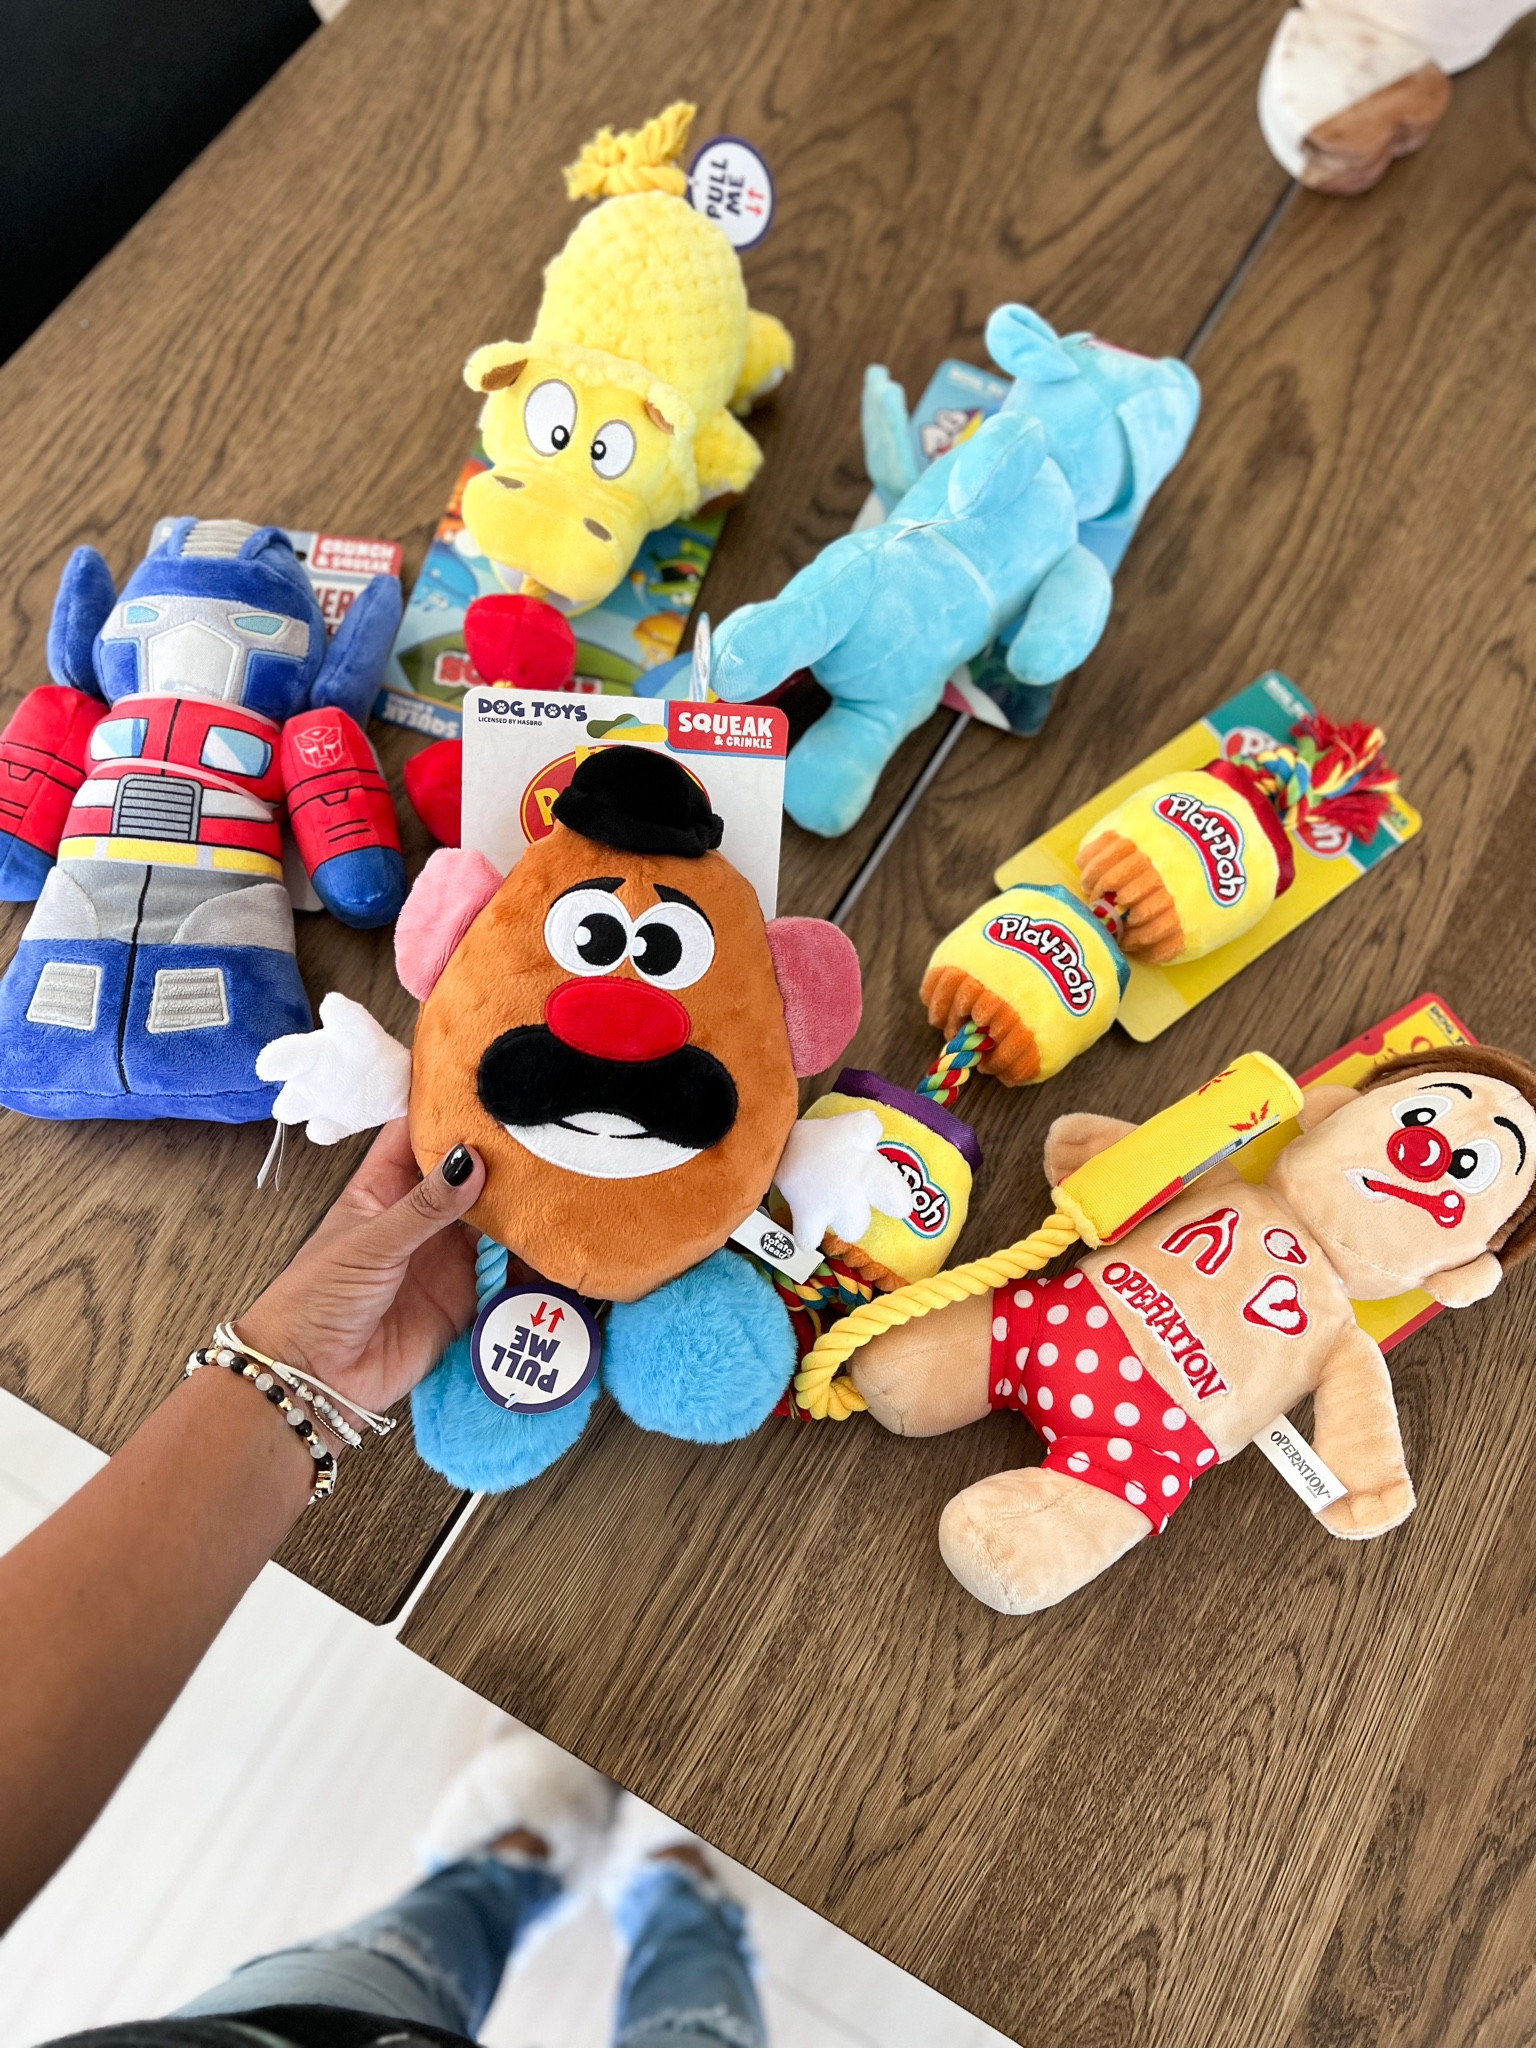 Hasbro Mr. Potato Head With Rope Dog Toy - Brown : Target